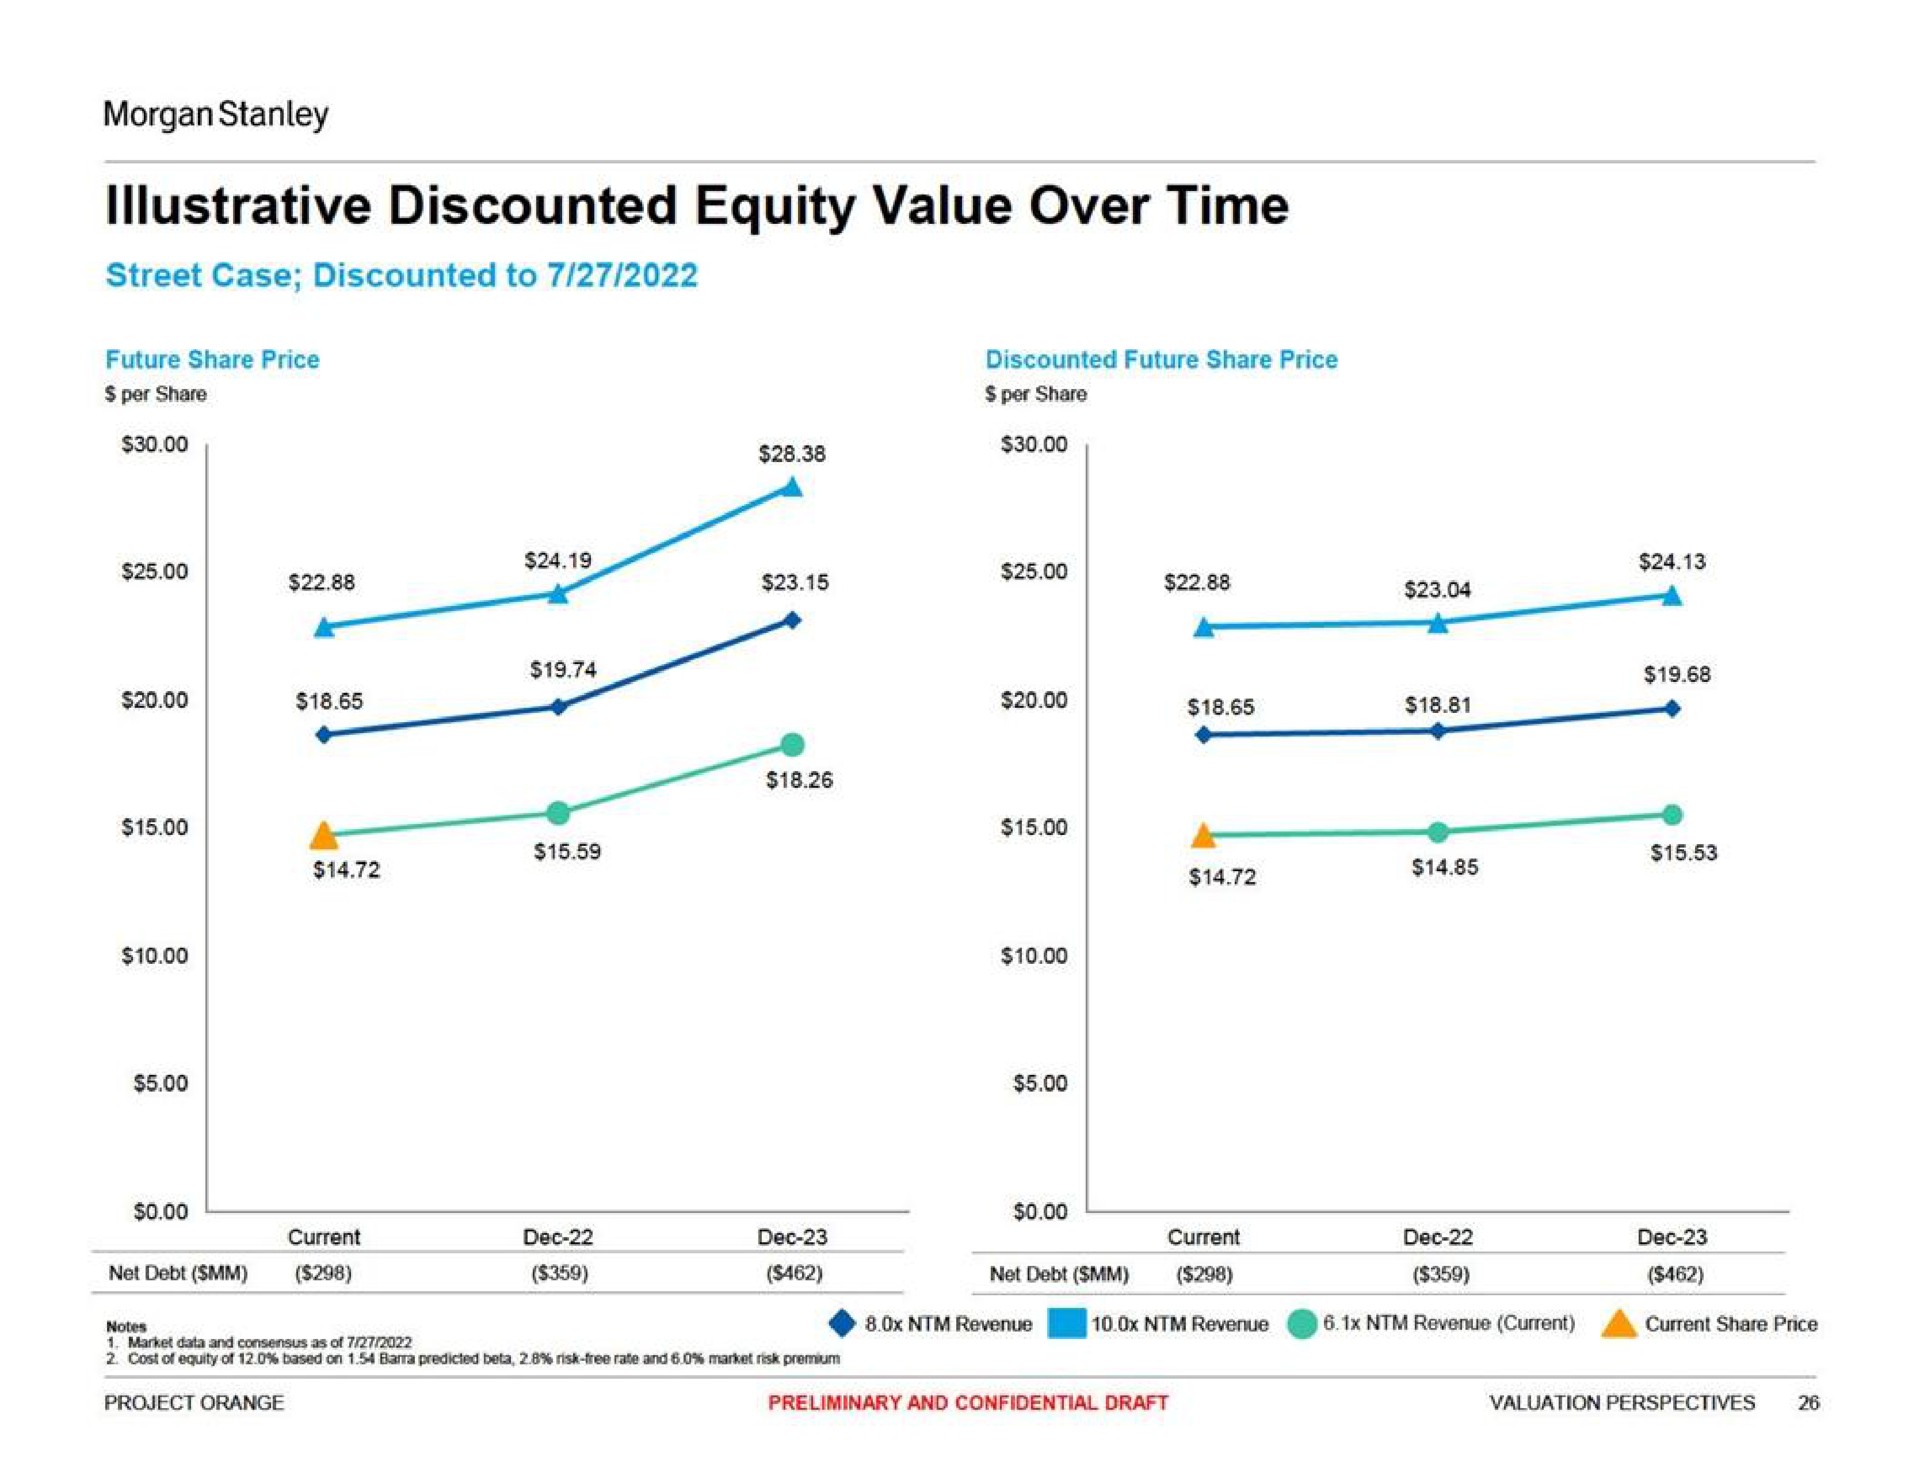 illustrative discounted equity value over time | Morgan Stanley